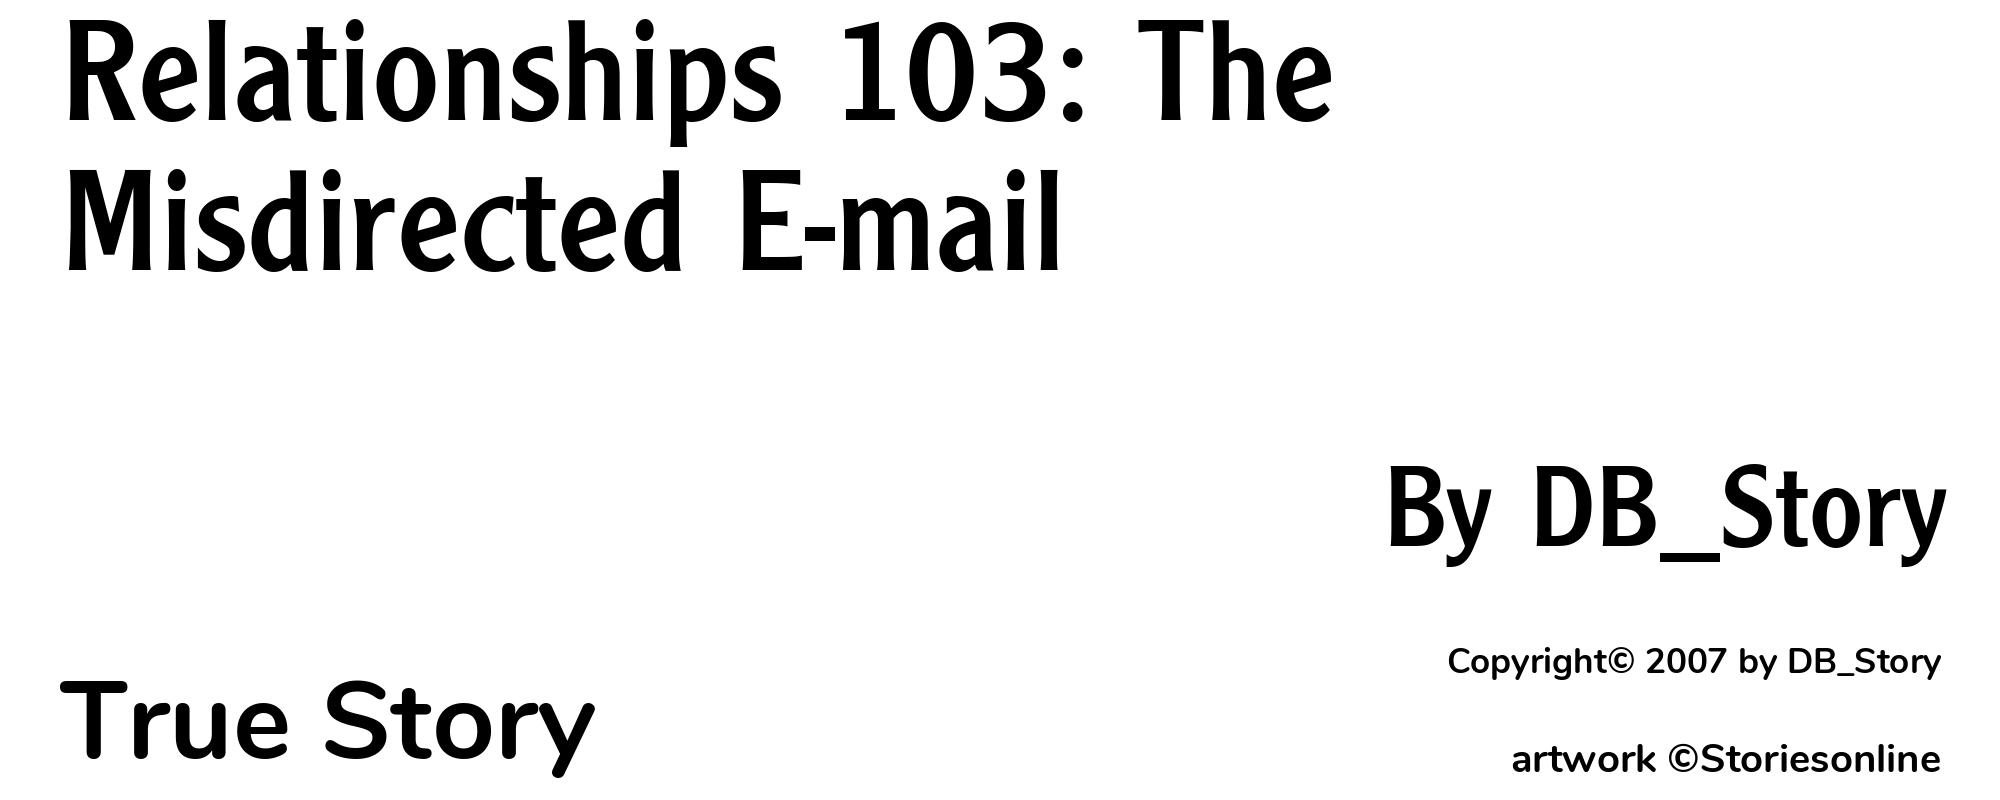 Relationships 103: The Misdirected E-mail - Cover